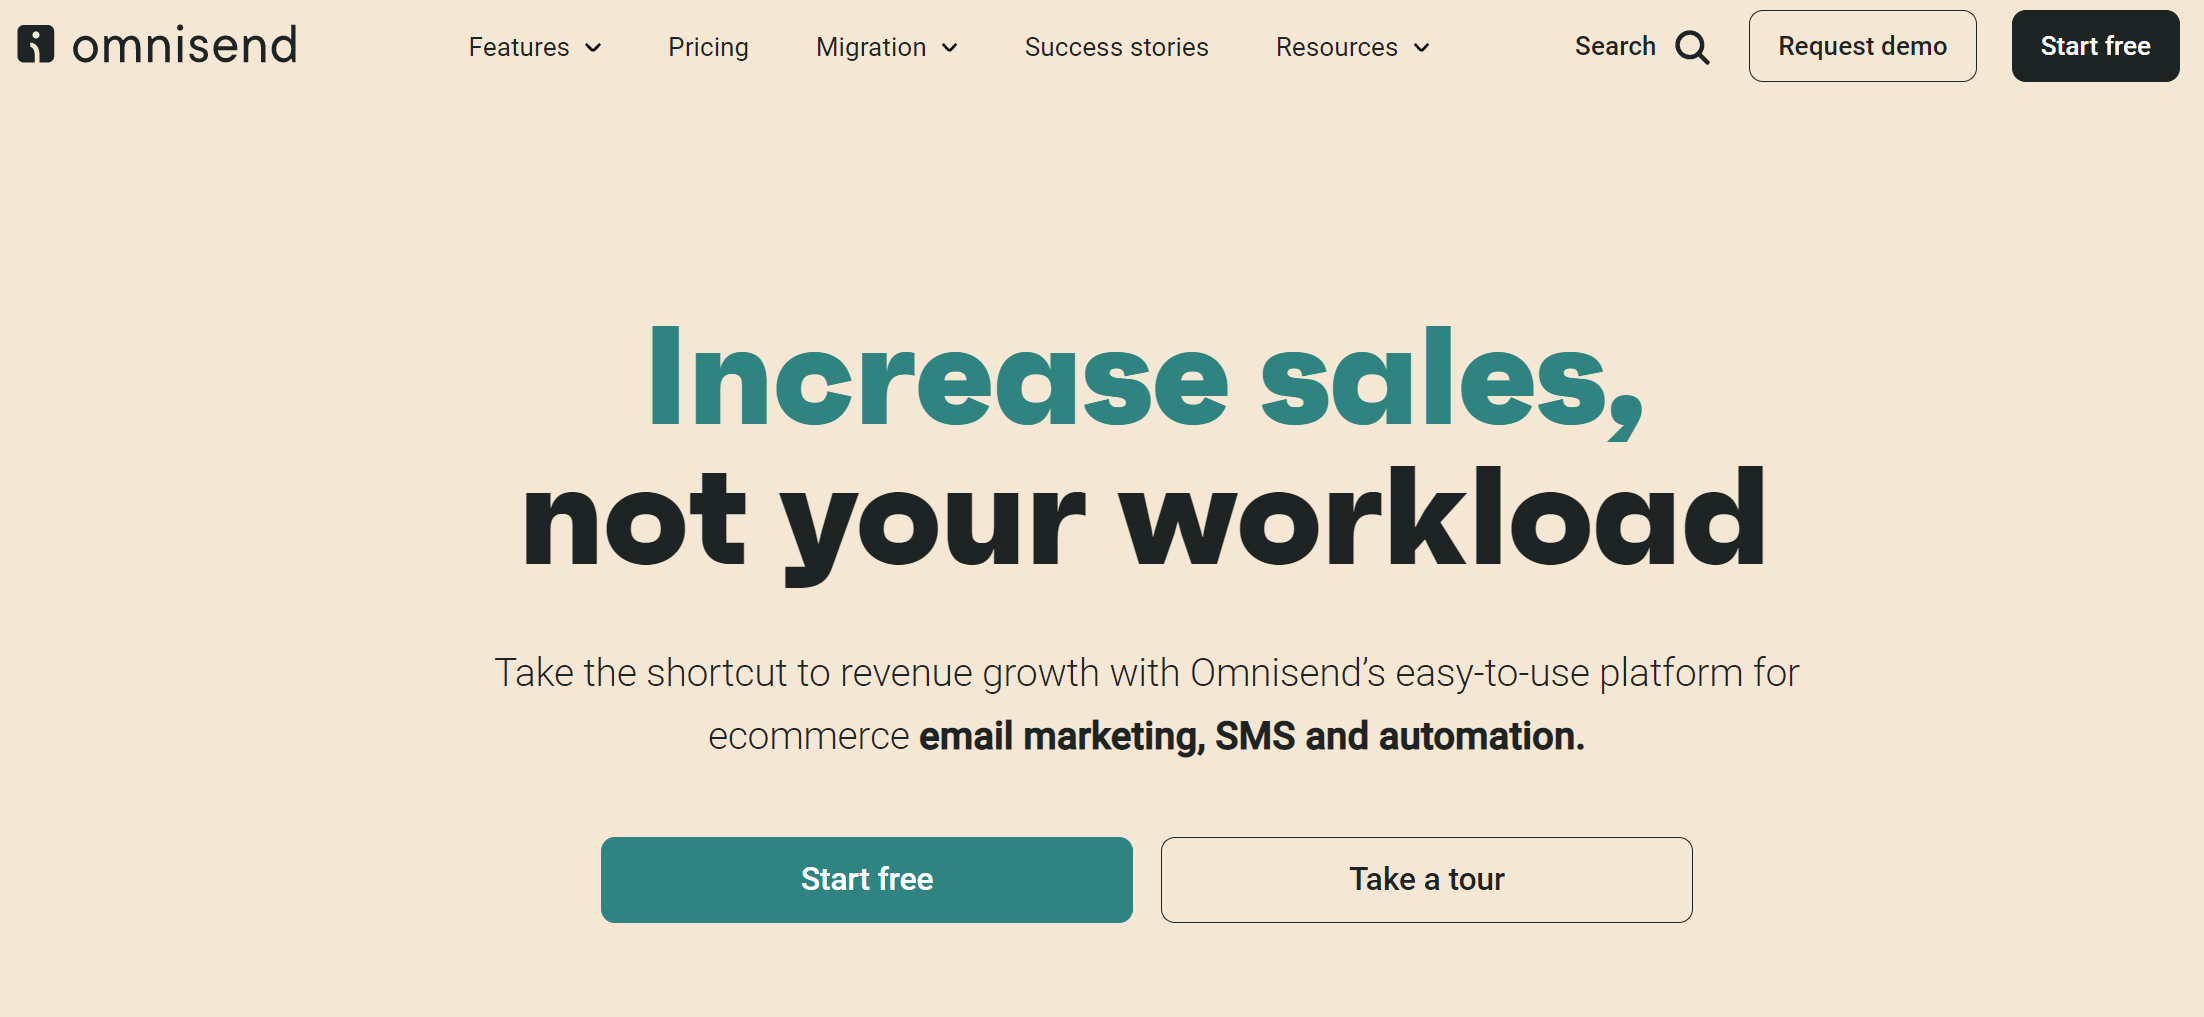 omnisend email marketing competitor to Drip